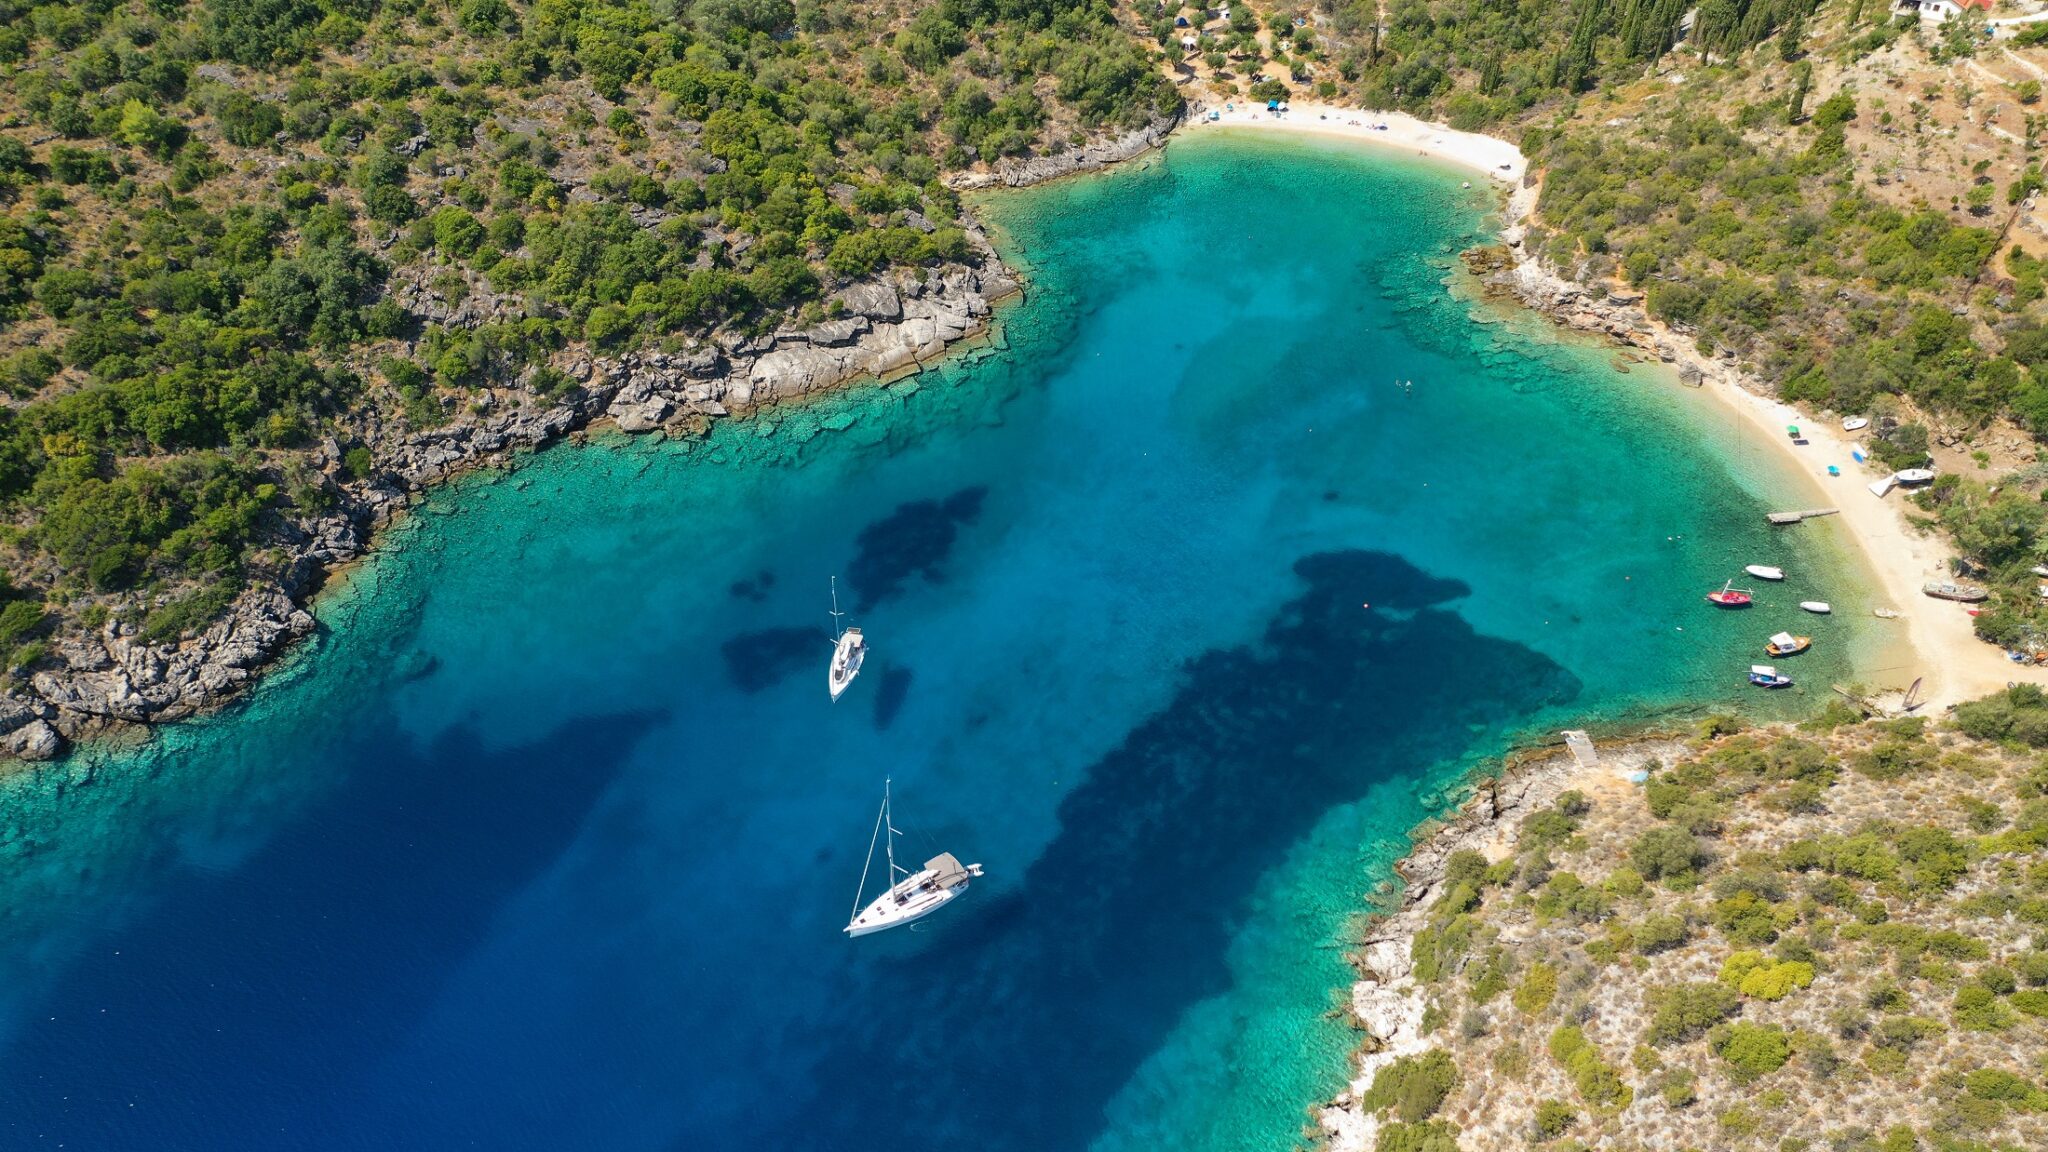 Explore the Ionian Islands visiting Corfù, Ithaca, Kefalonia with